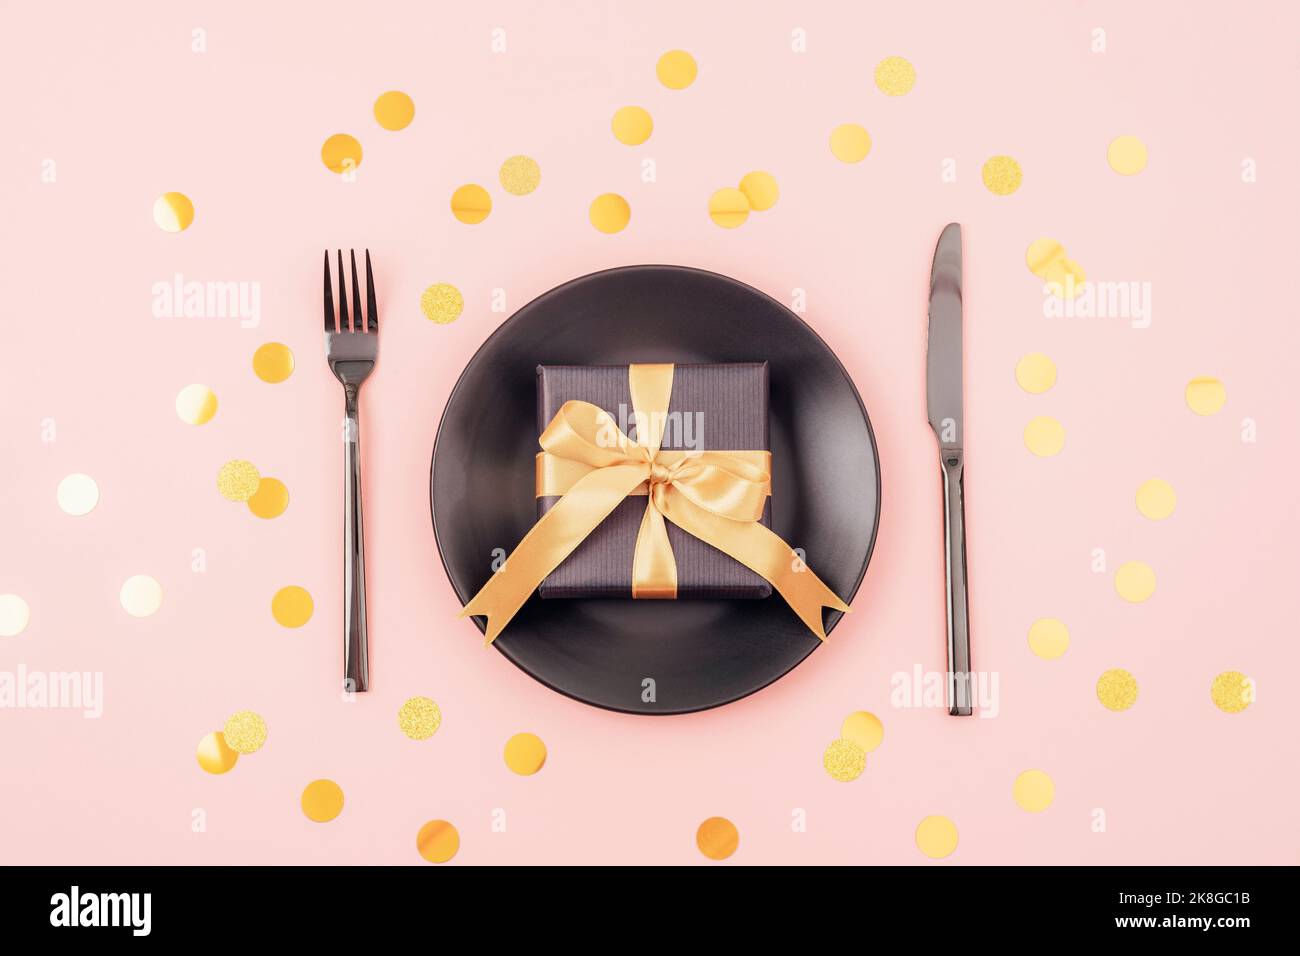 Stylish table setting, gift box, black plate, cutlery on pink background with golden confetti. Christmas concept. Top view, flat lay Stock Photo